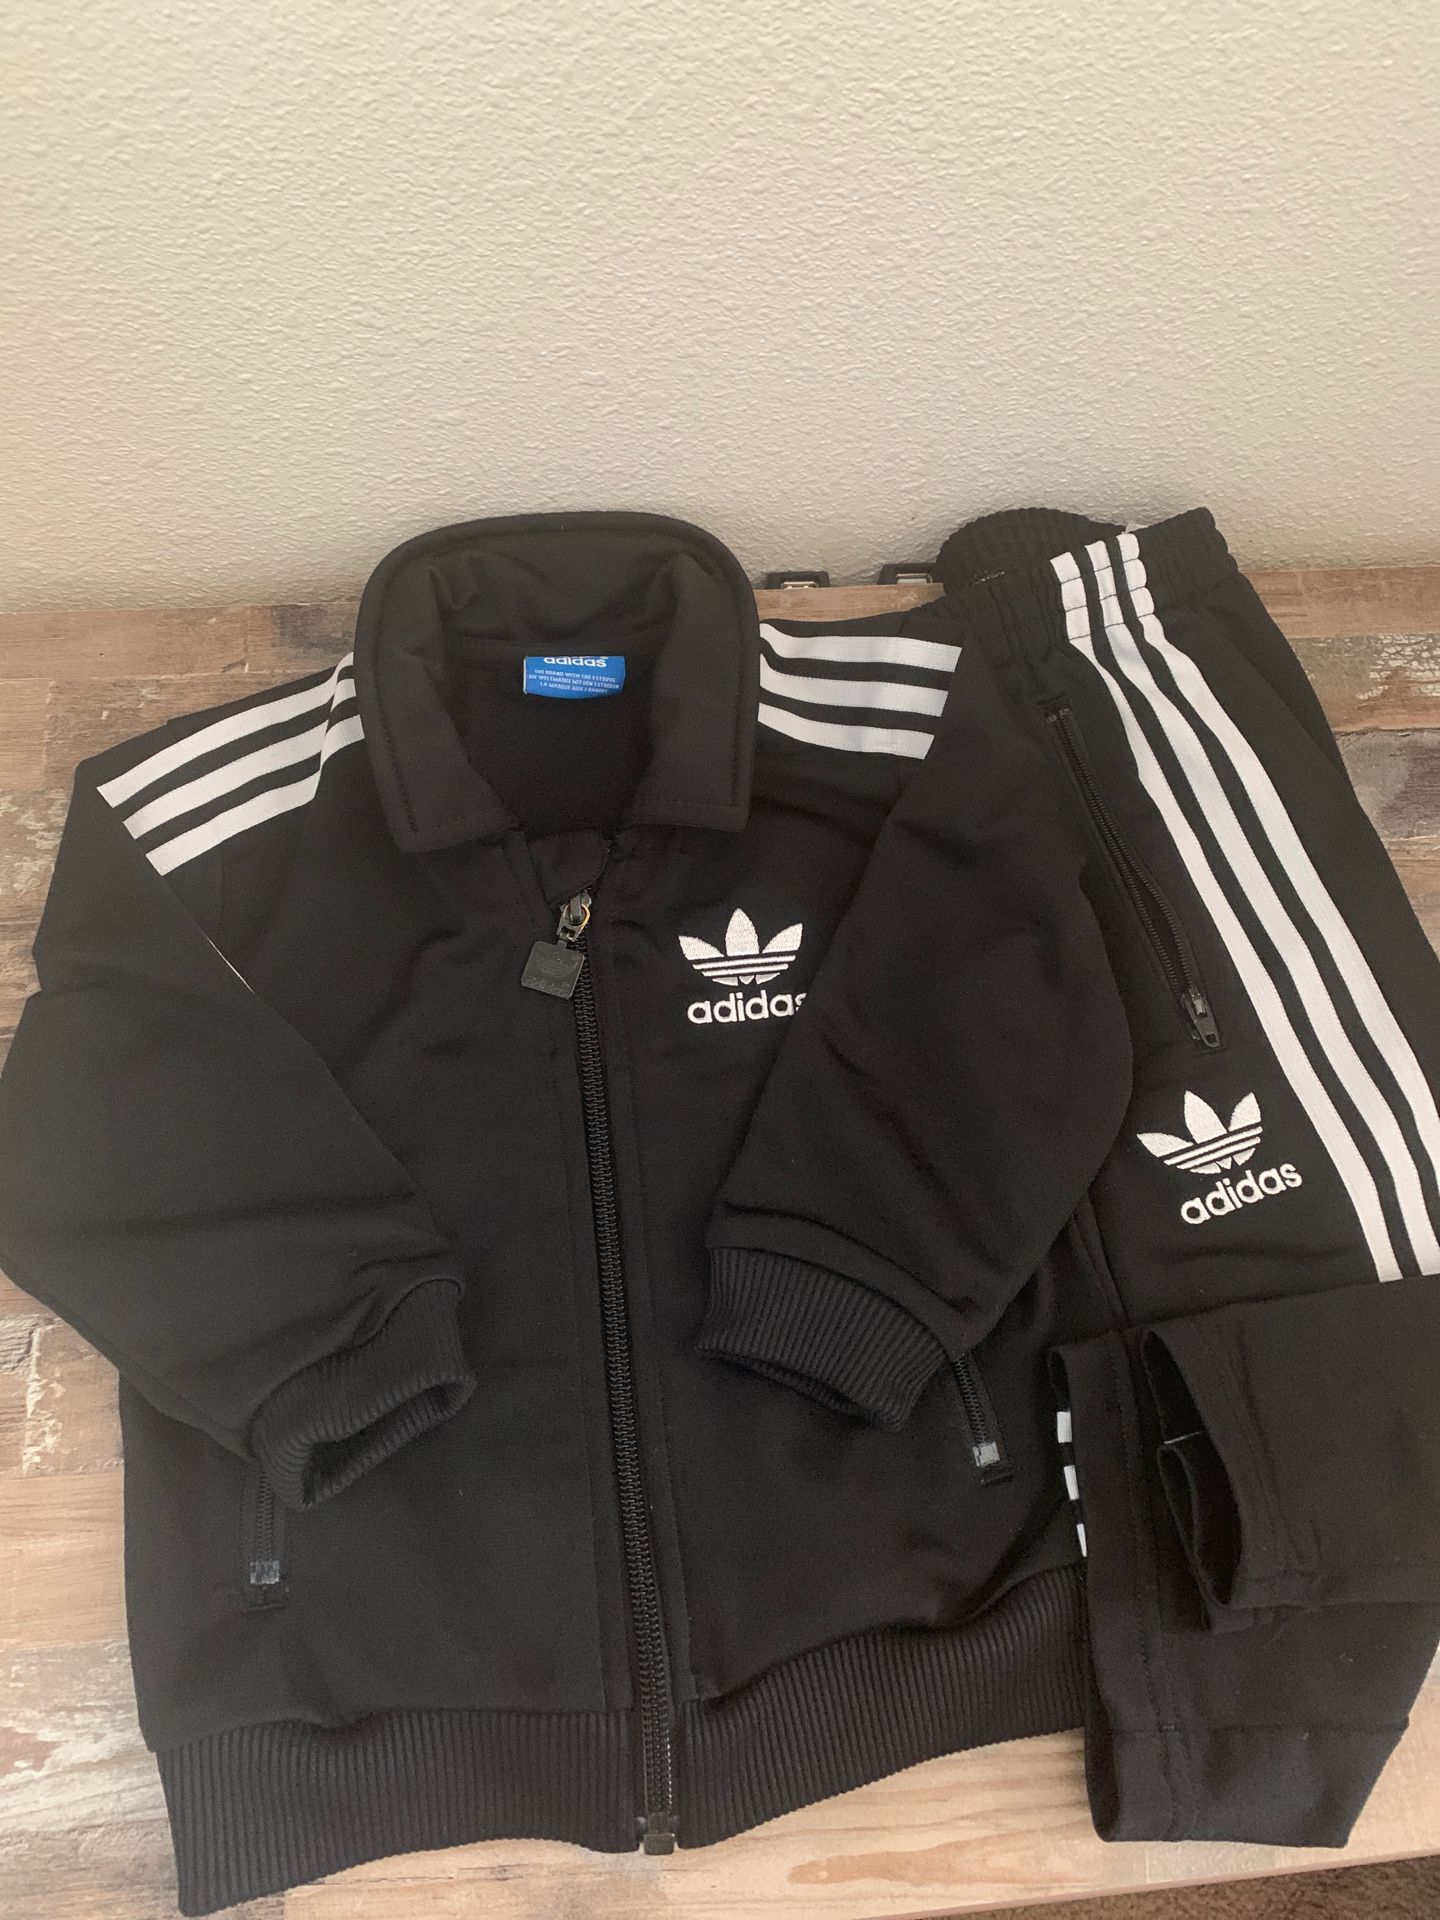 Baby boy Adidas 18month outfit